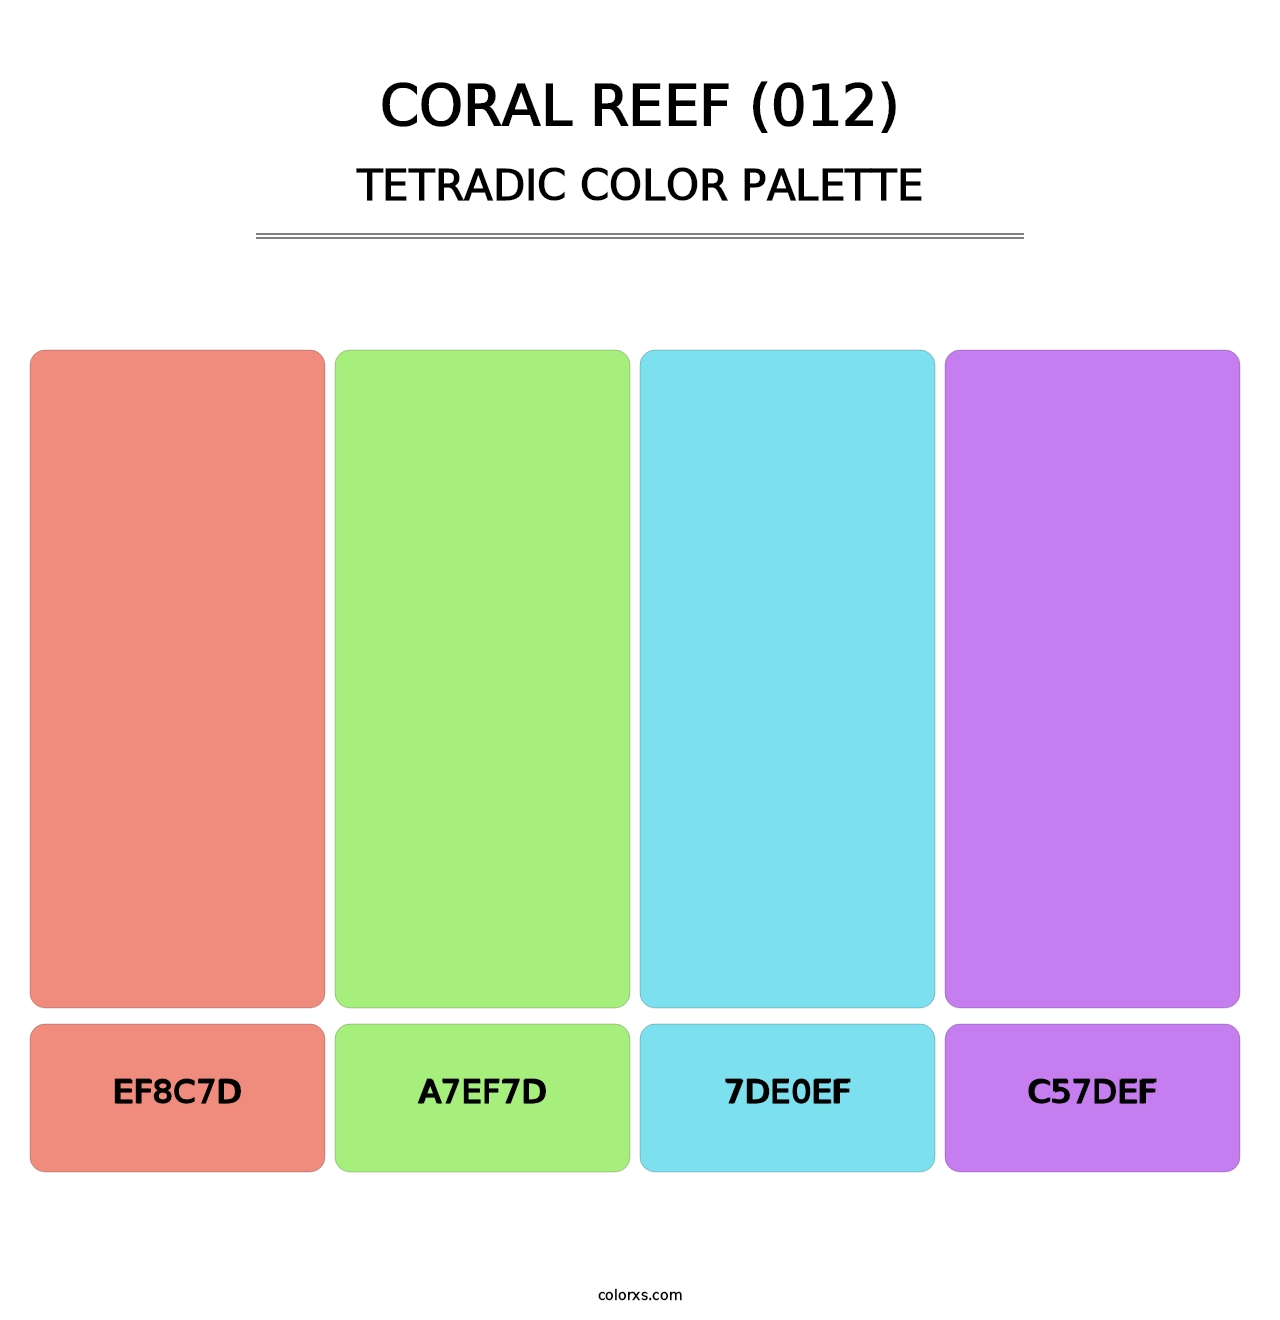 Coral Reef (012) - Tetradic Color Palette